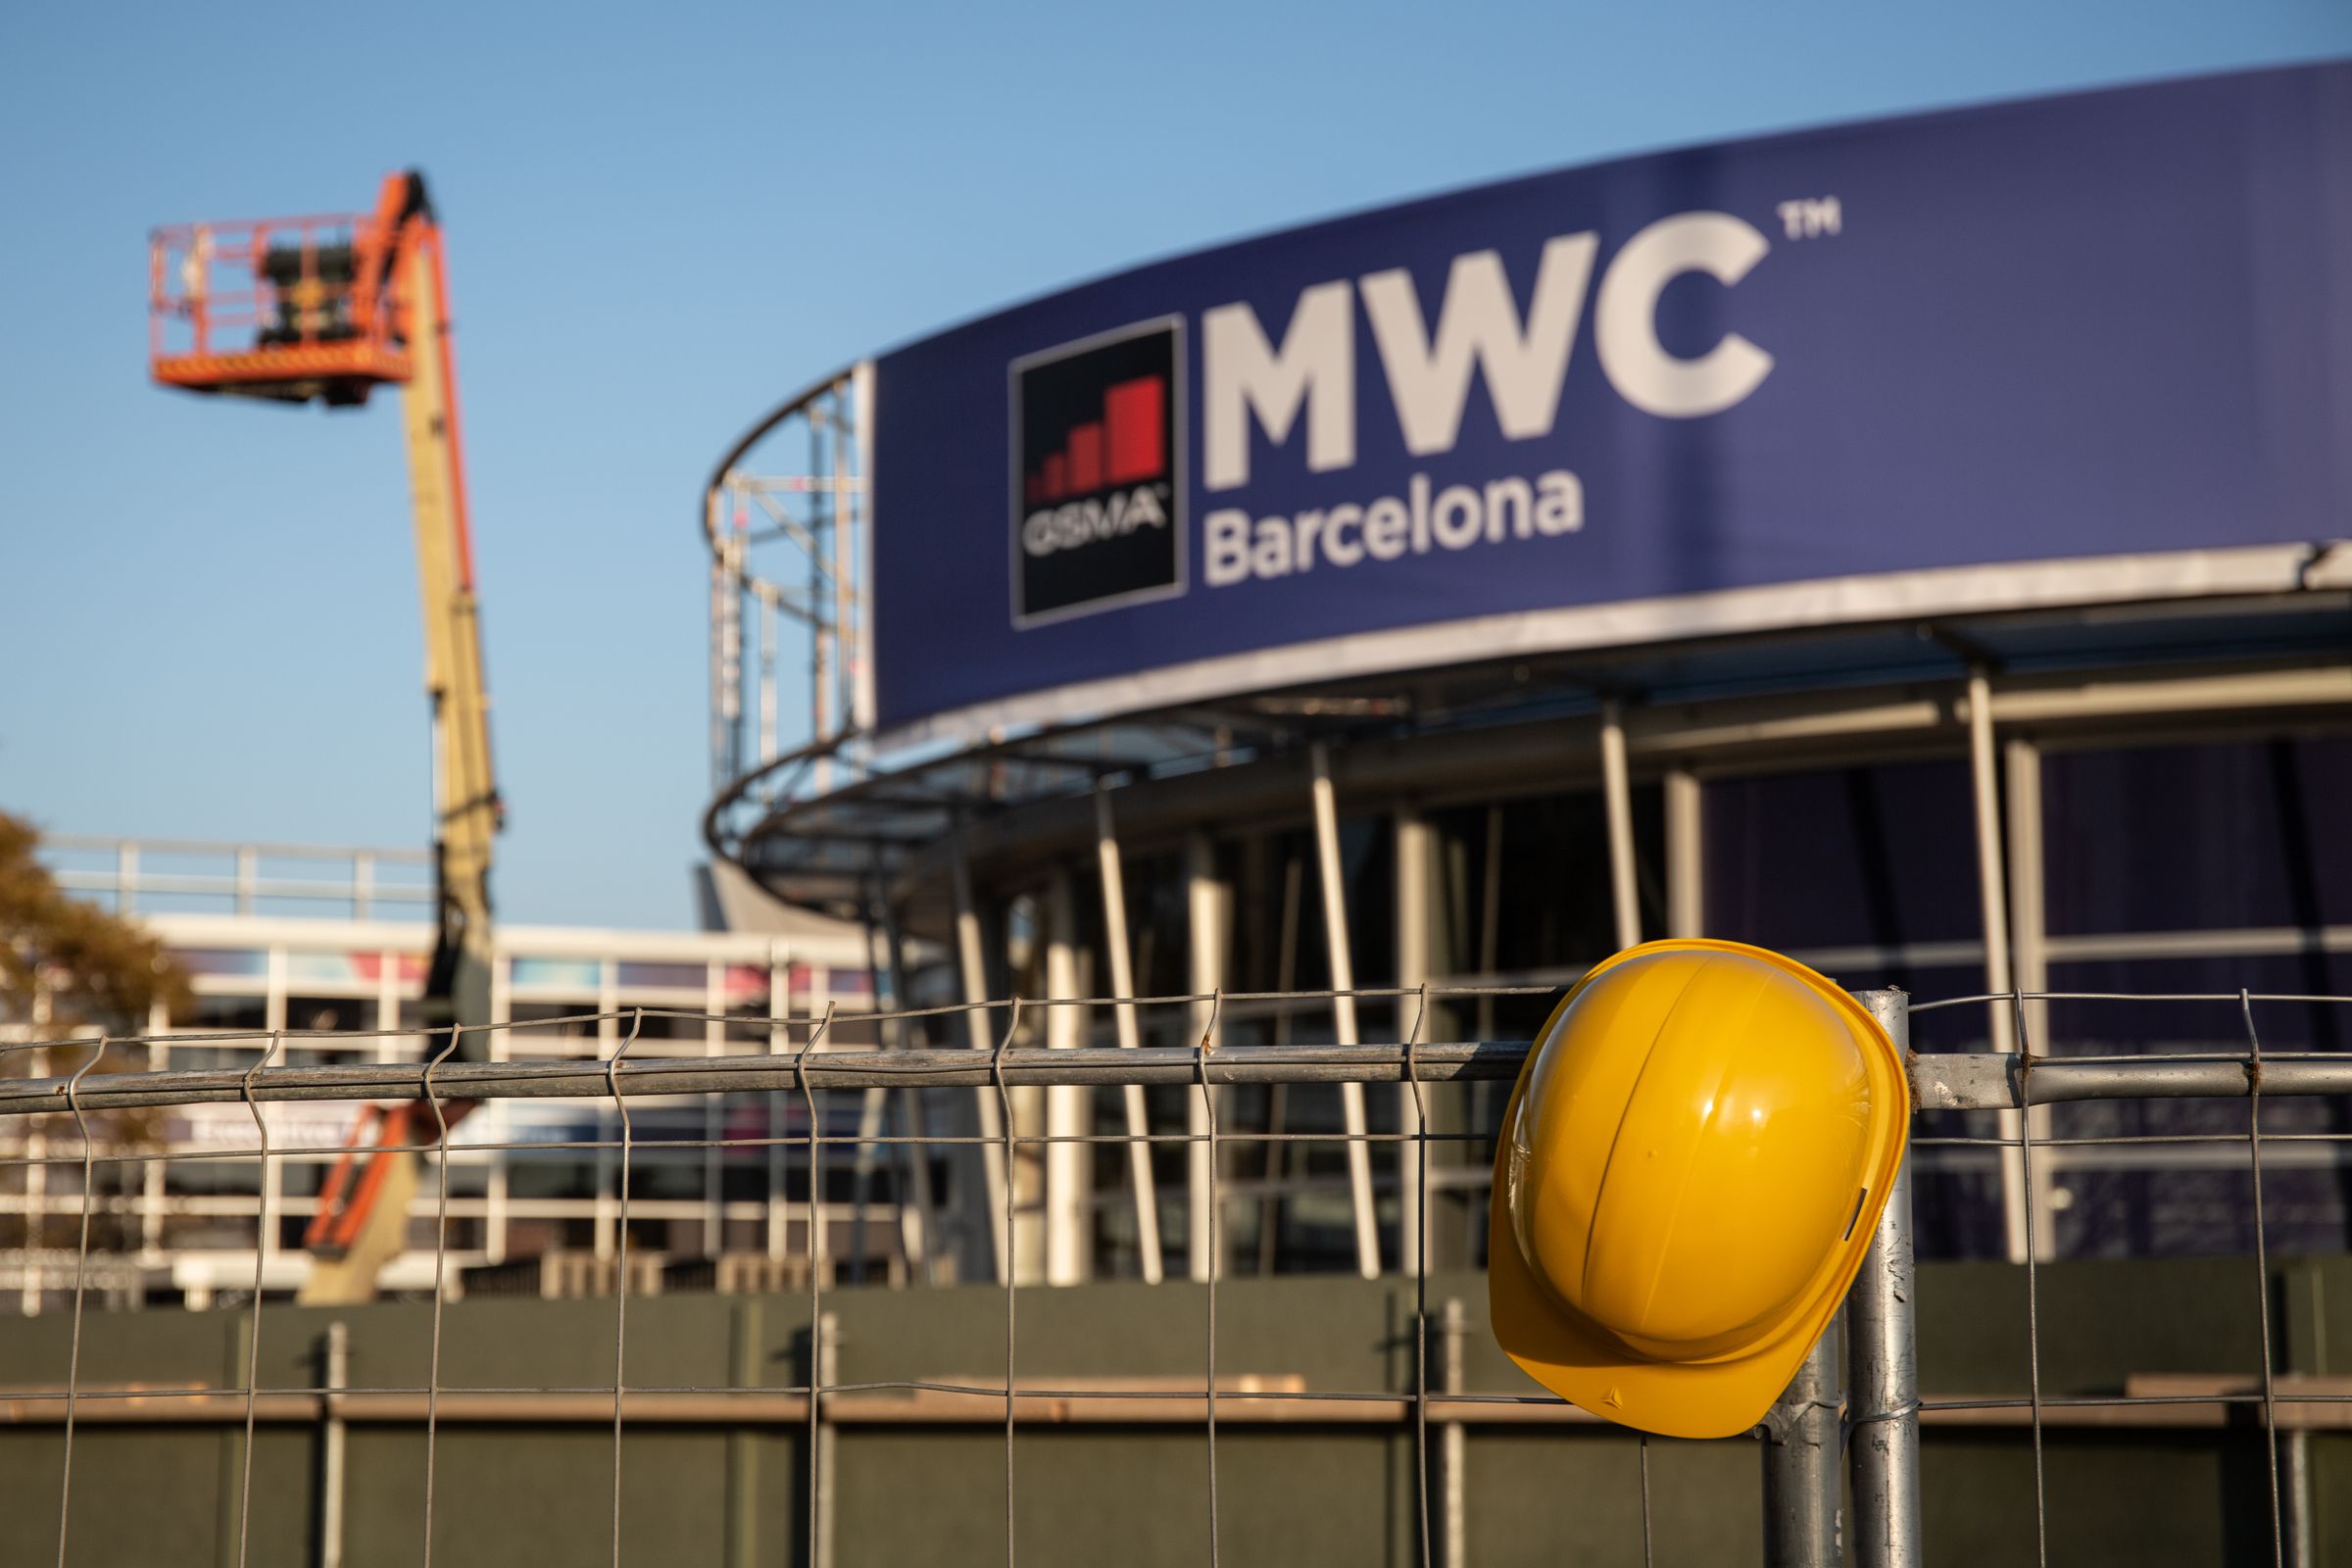 Mobile World Congress Stands Dismantled After Fair Cancellation